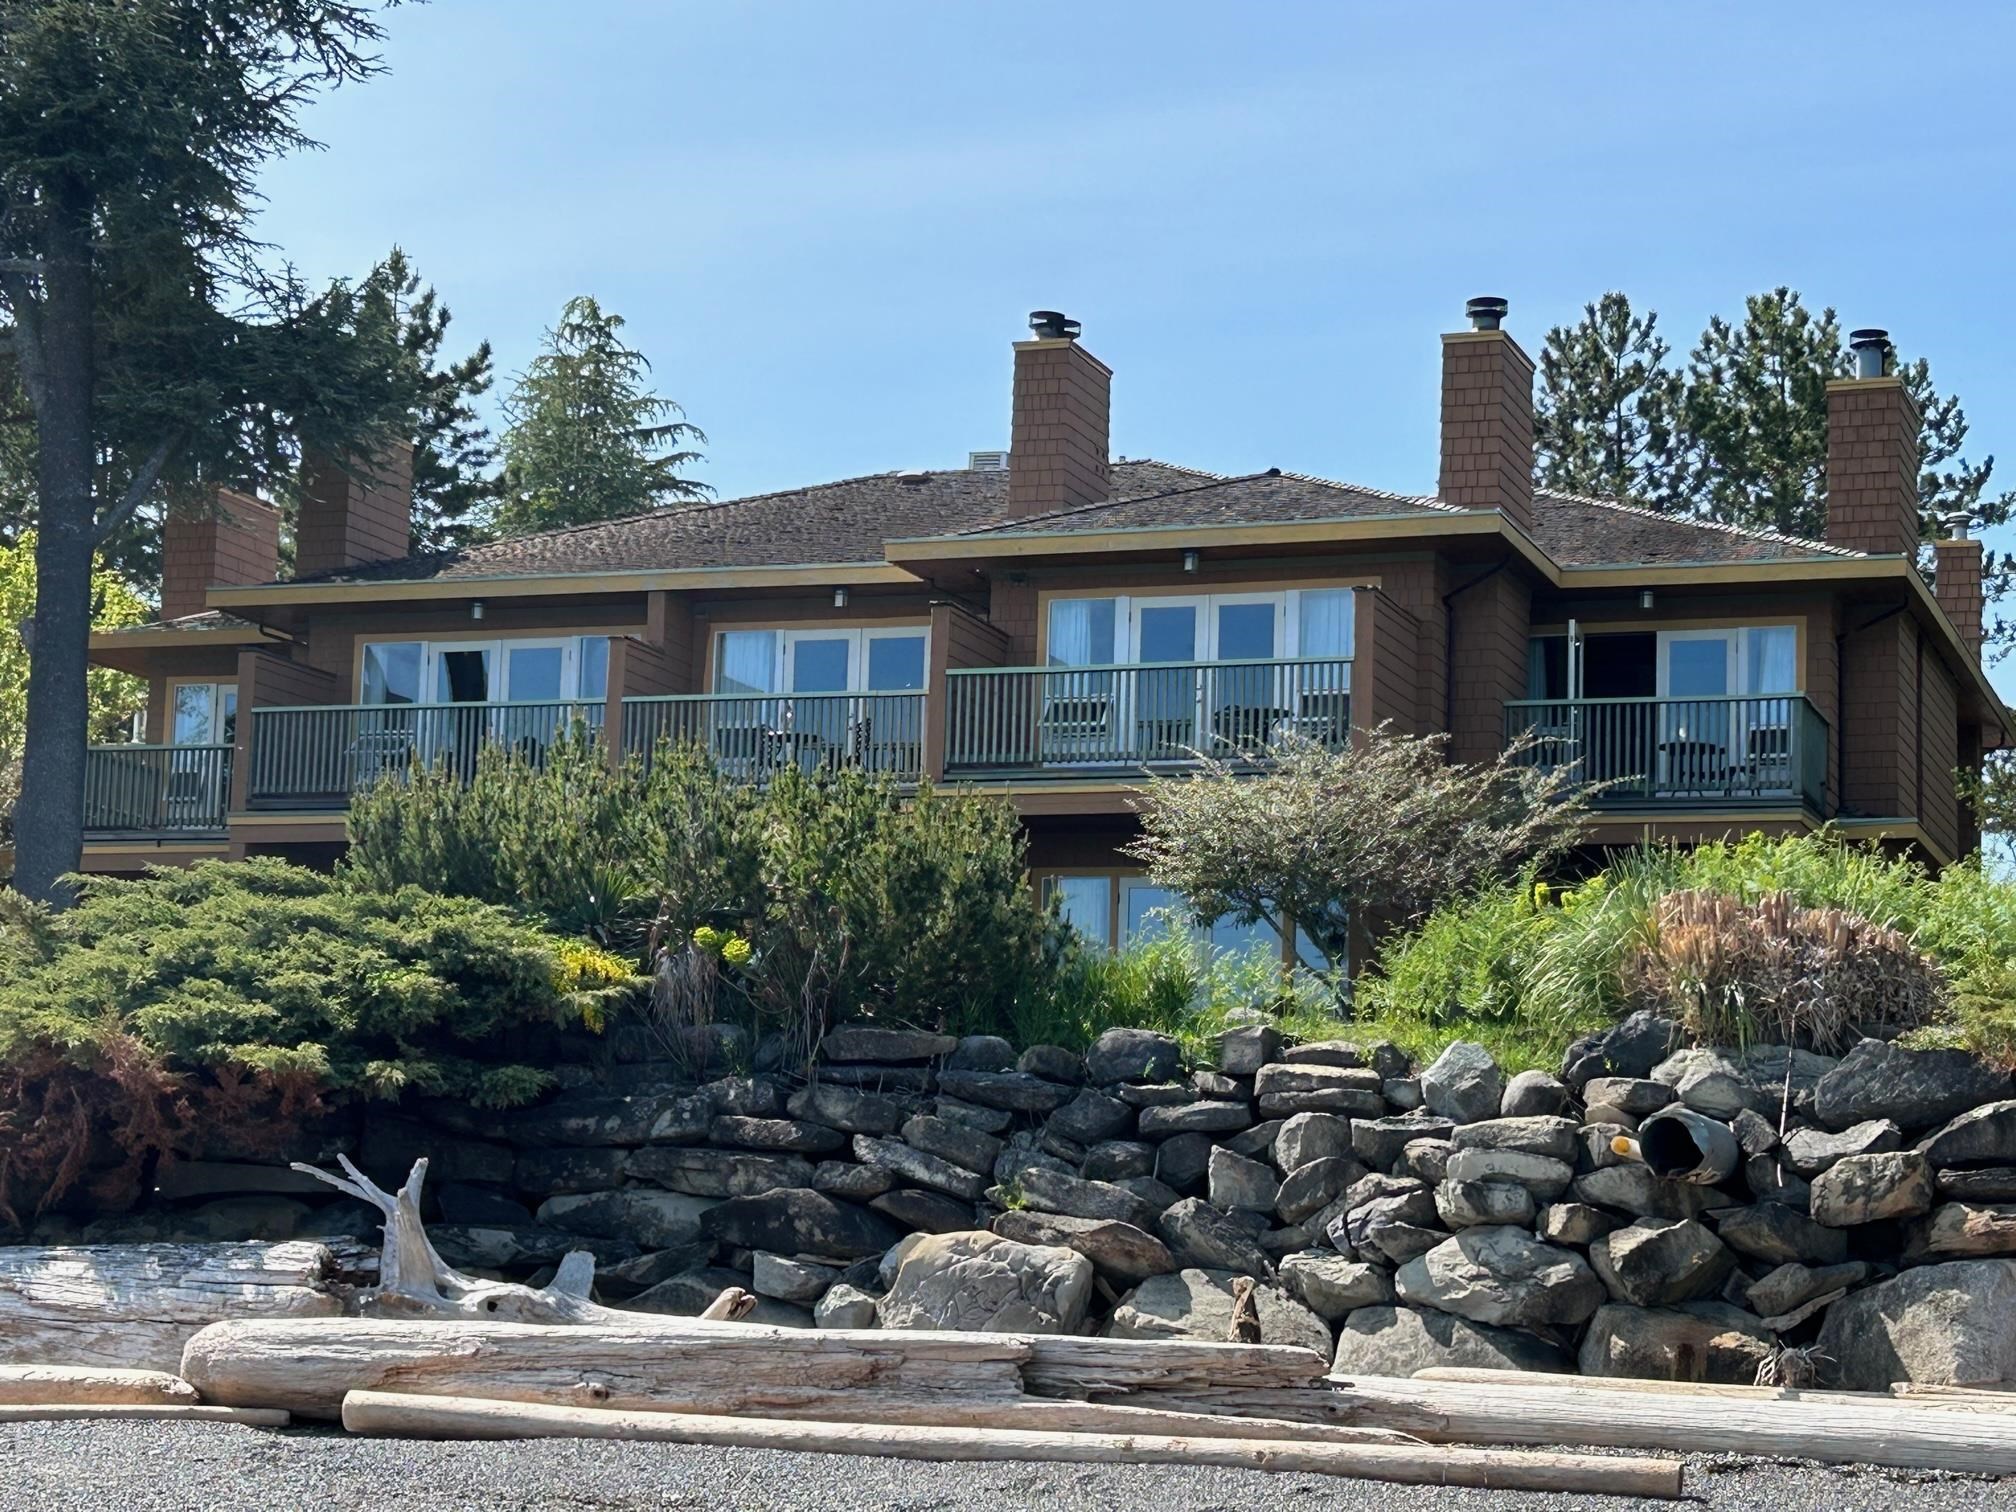 Listing image of 5A 134 MADRONA DRIVE